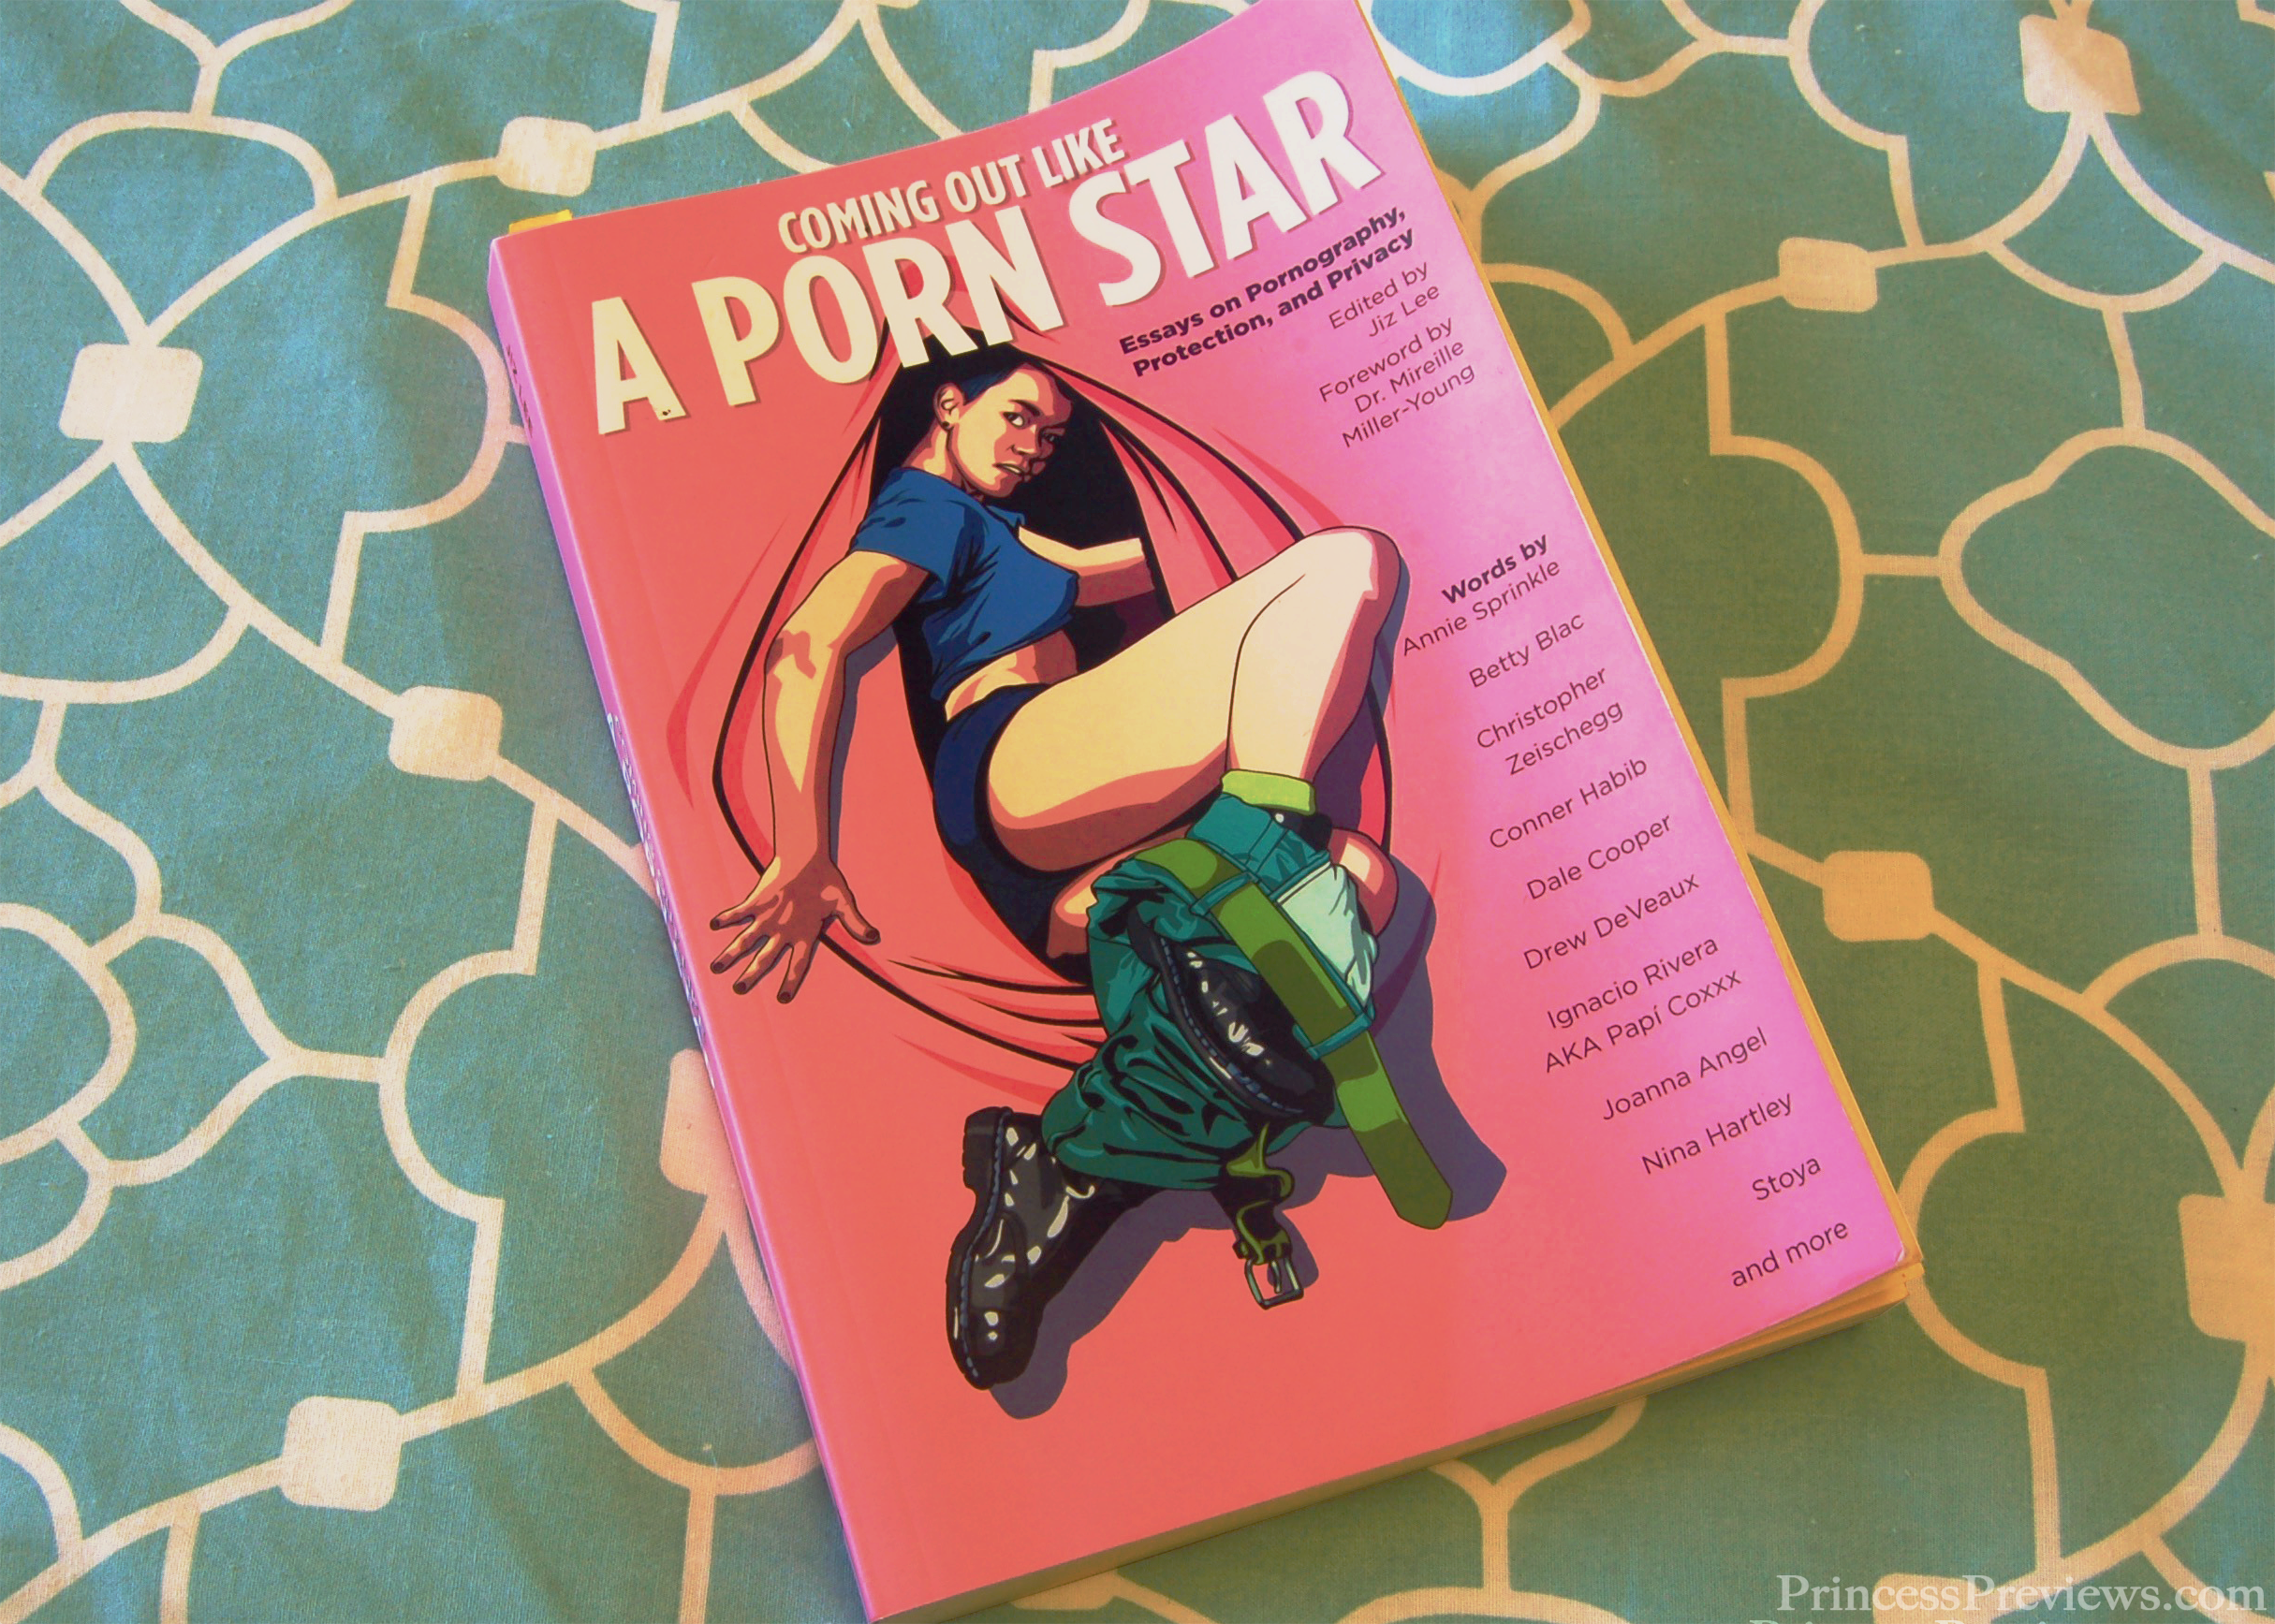 Book Review: Coming Out Like A Porn Star - Princess Previews